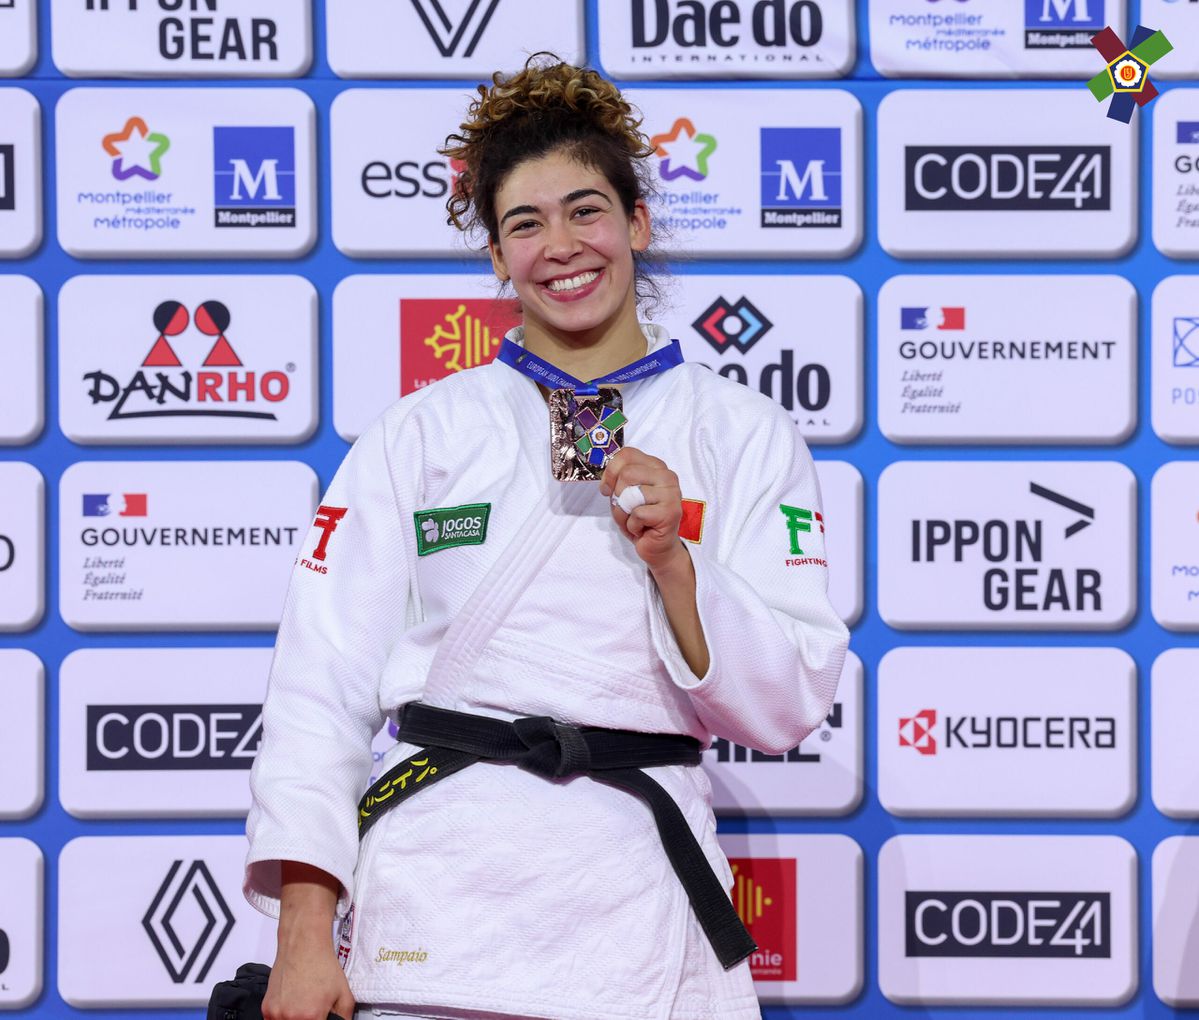 Patricia and bronze at the European Championships: “I’m speechless, this is unbelievable!”